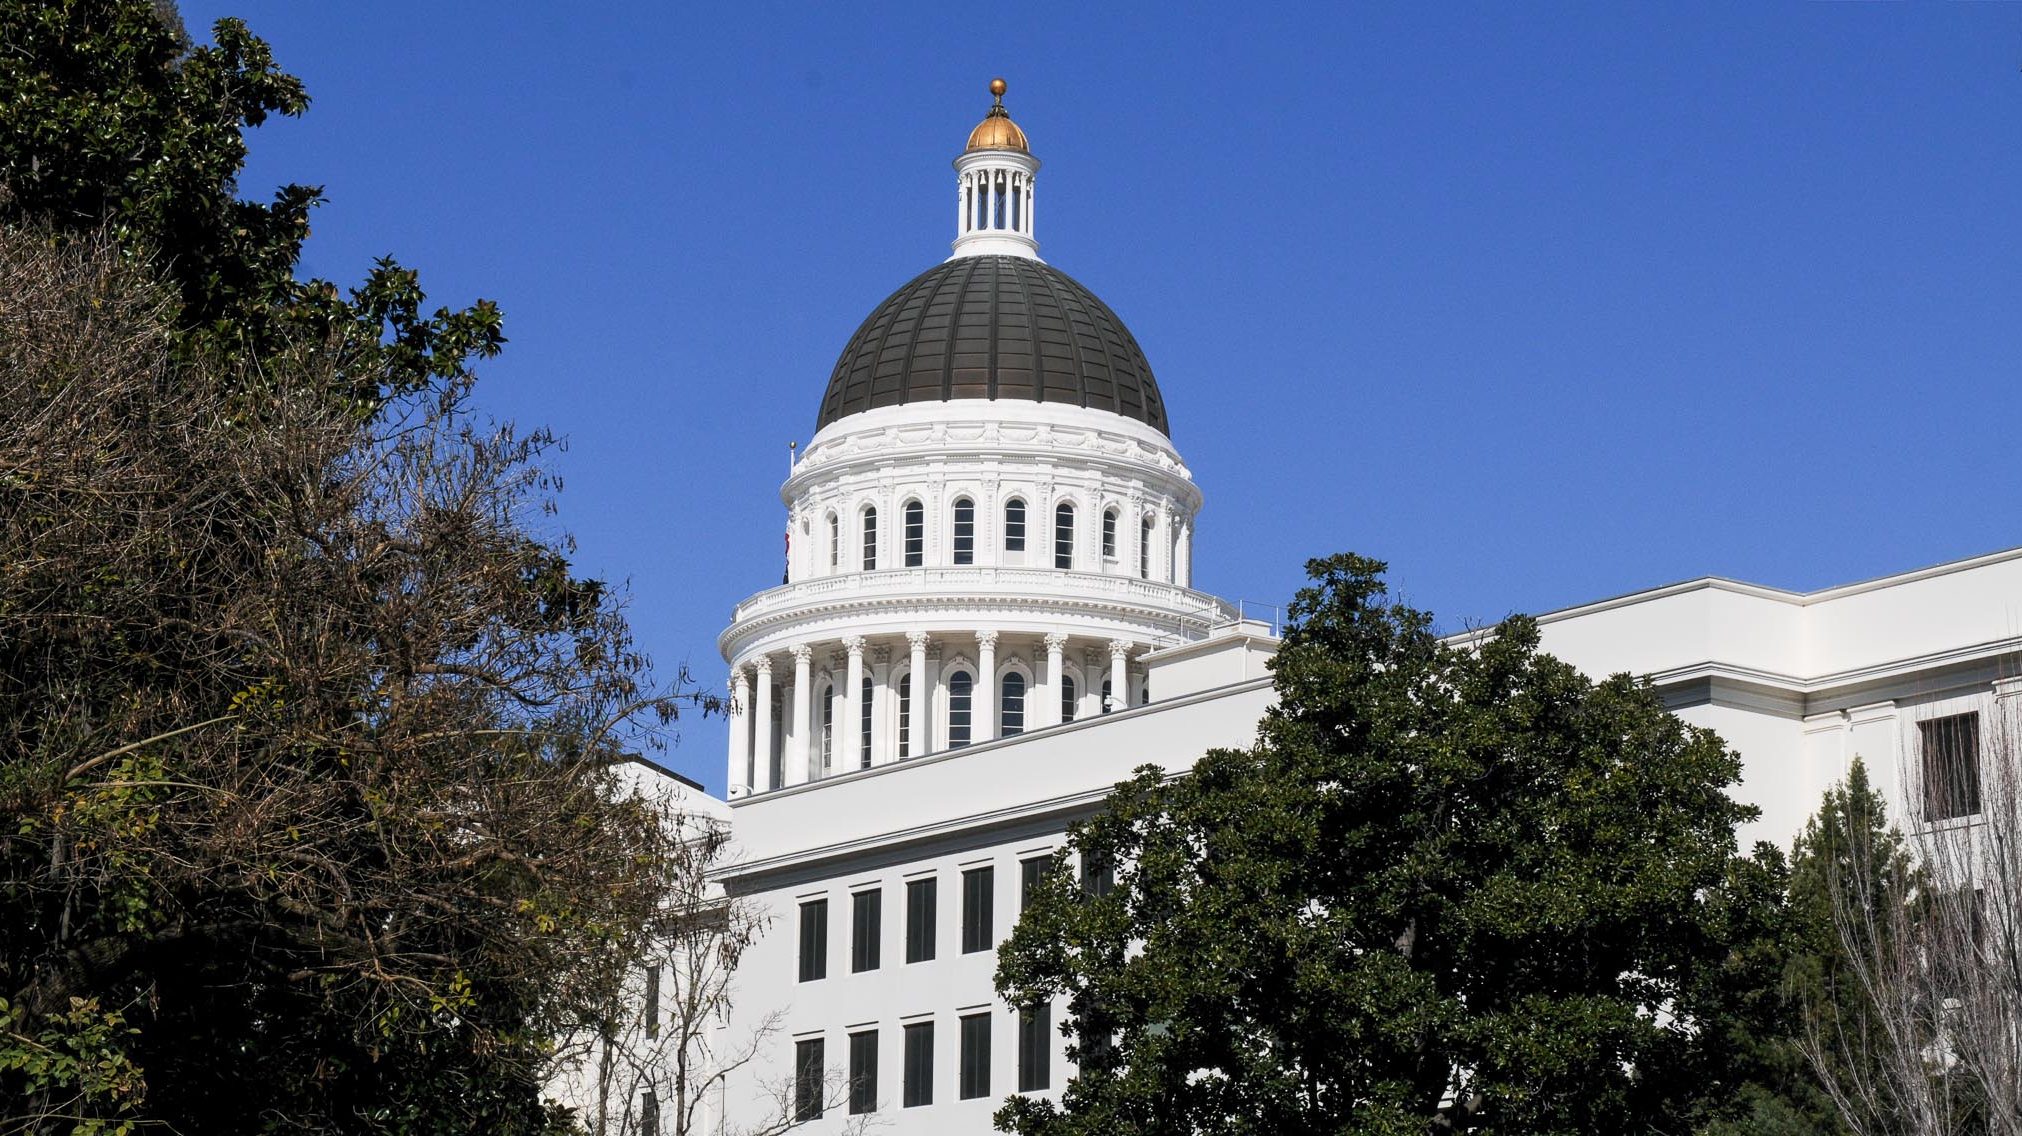 California State Capitol dome shines against blue sky